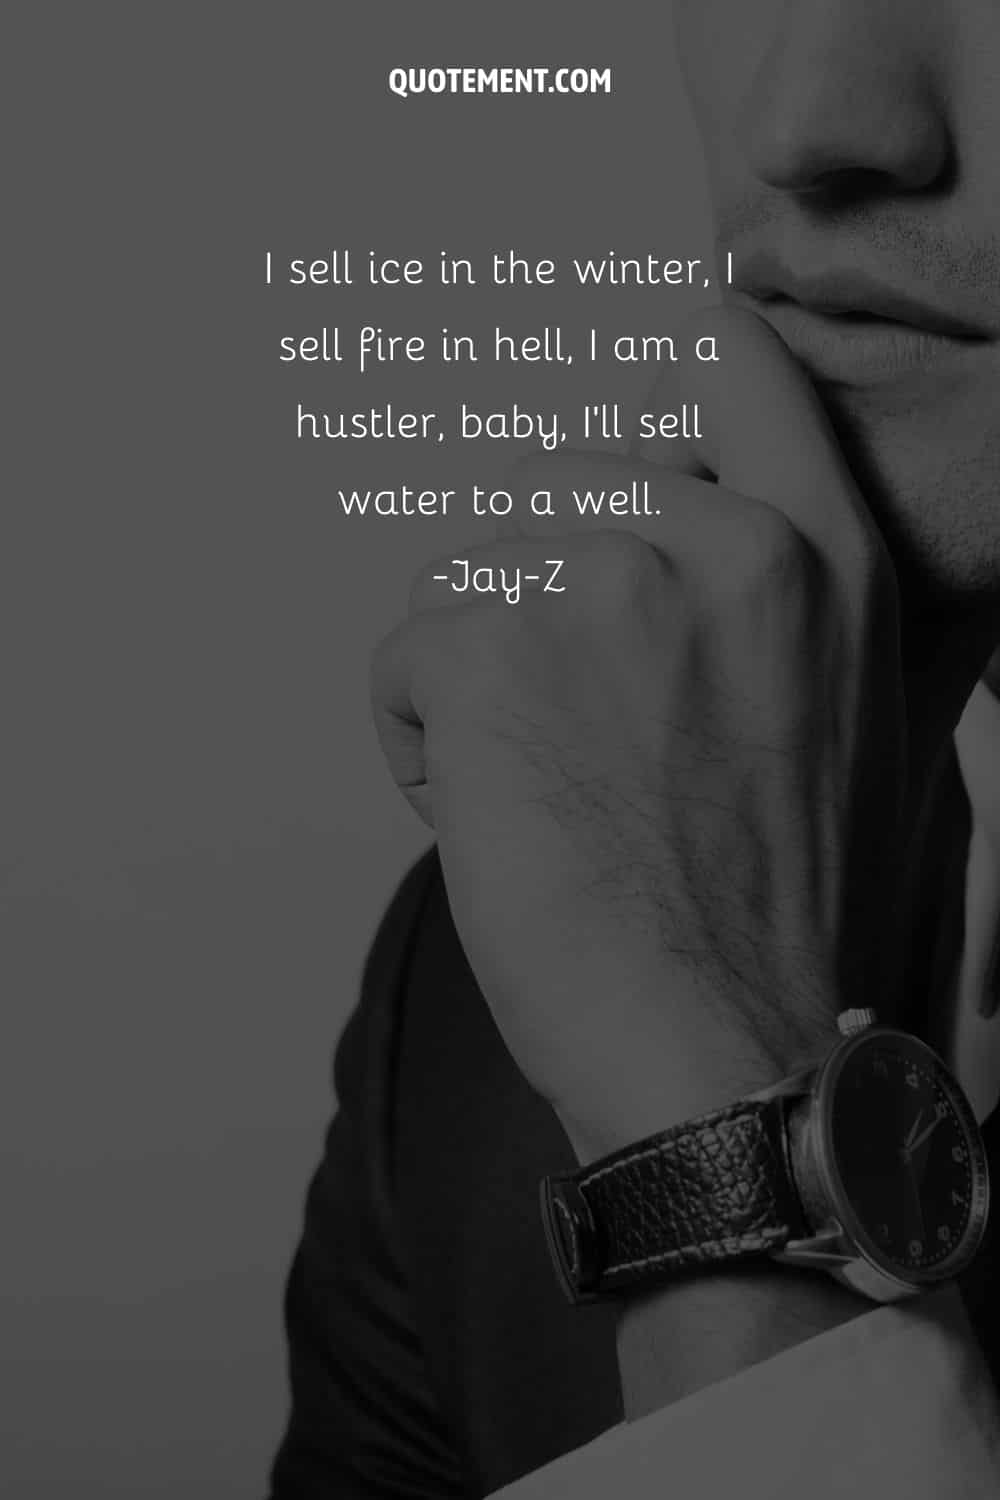 I sell ice in the winter, I sell fire in hell, I am a hustler, baby, I’ll sell water to a well.